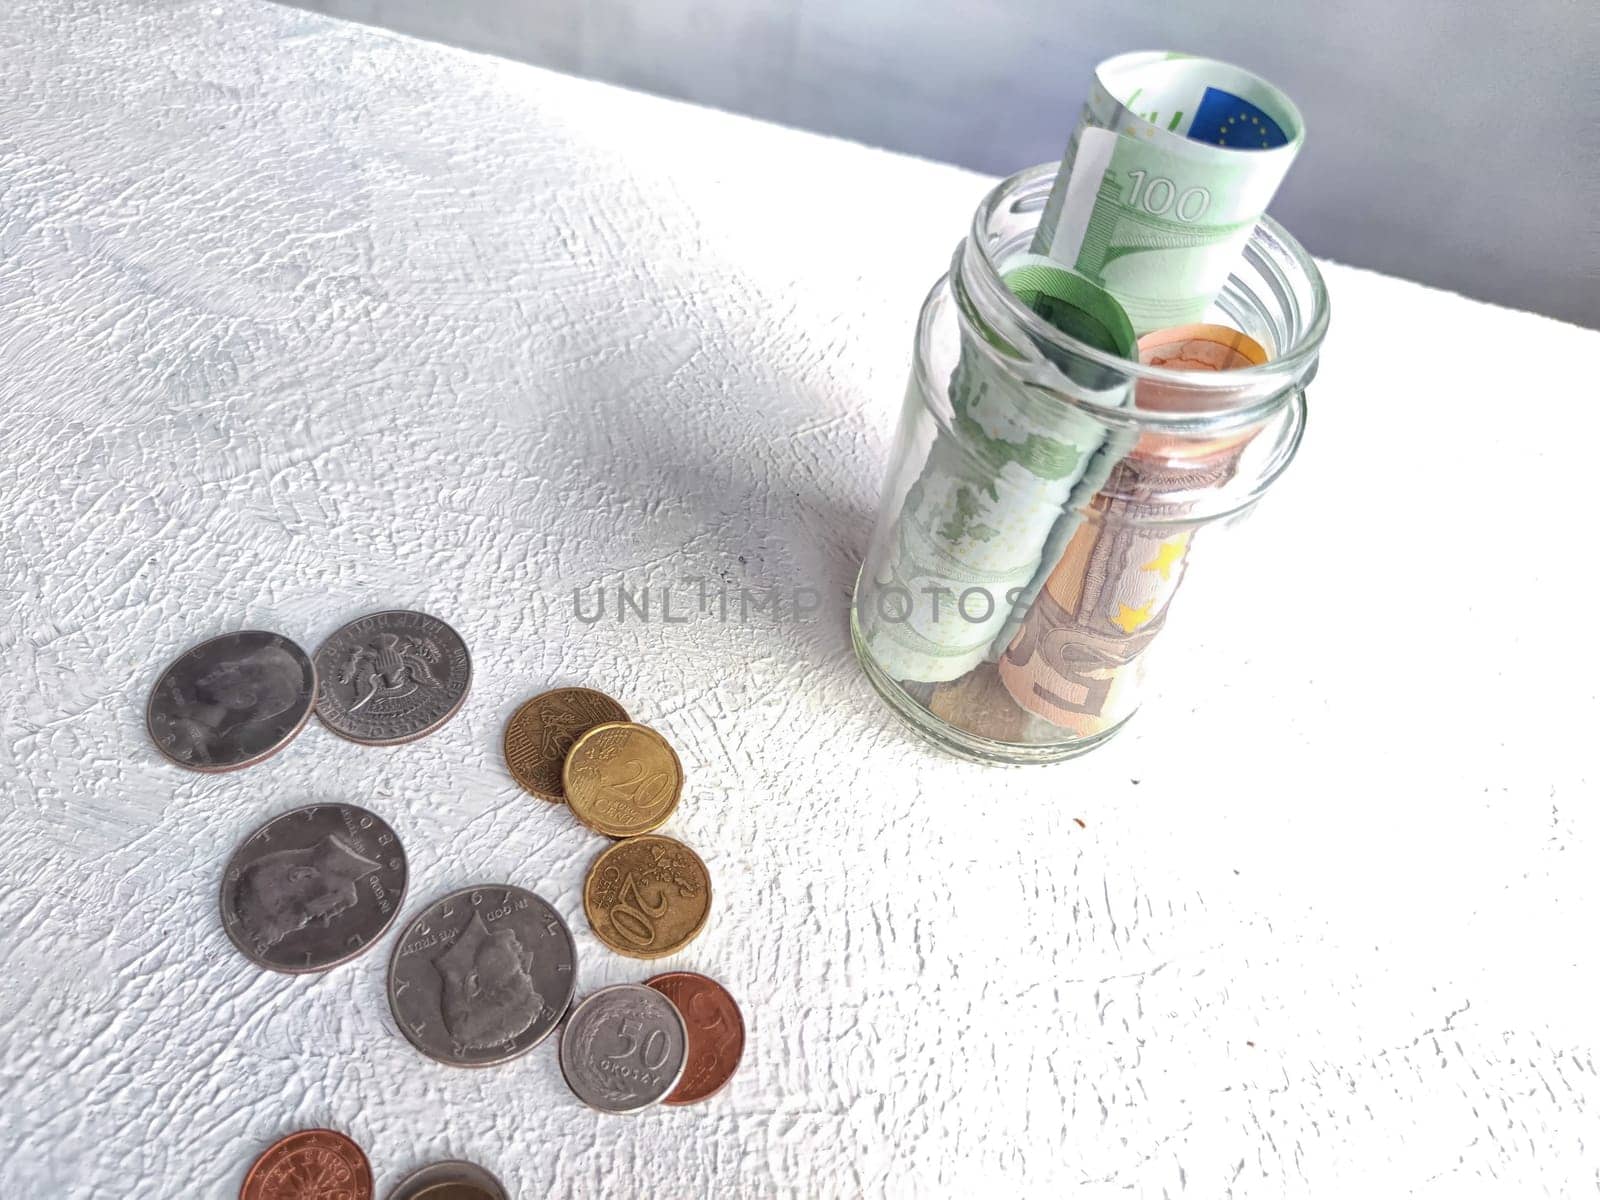 Glass Jar Filled With Euro Banknotes and Coins on Table. Concept of savings ranging from small money to large by keleny